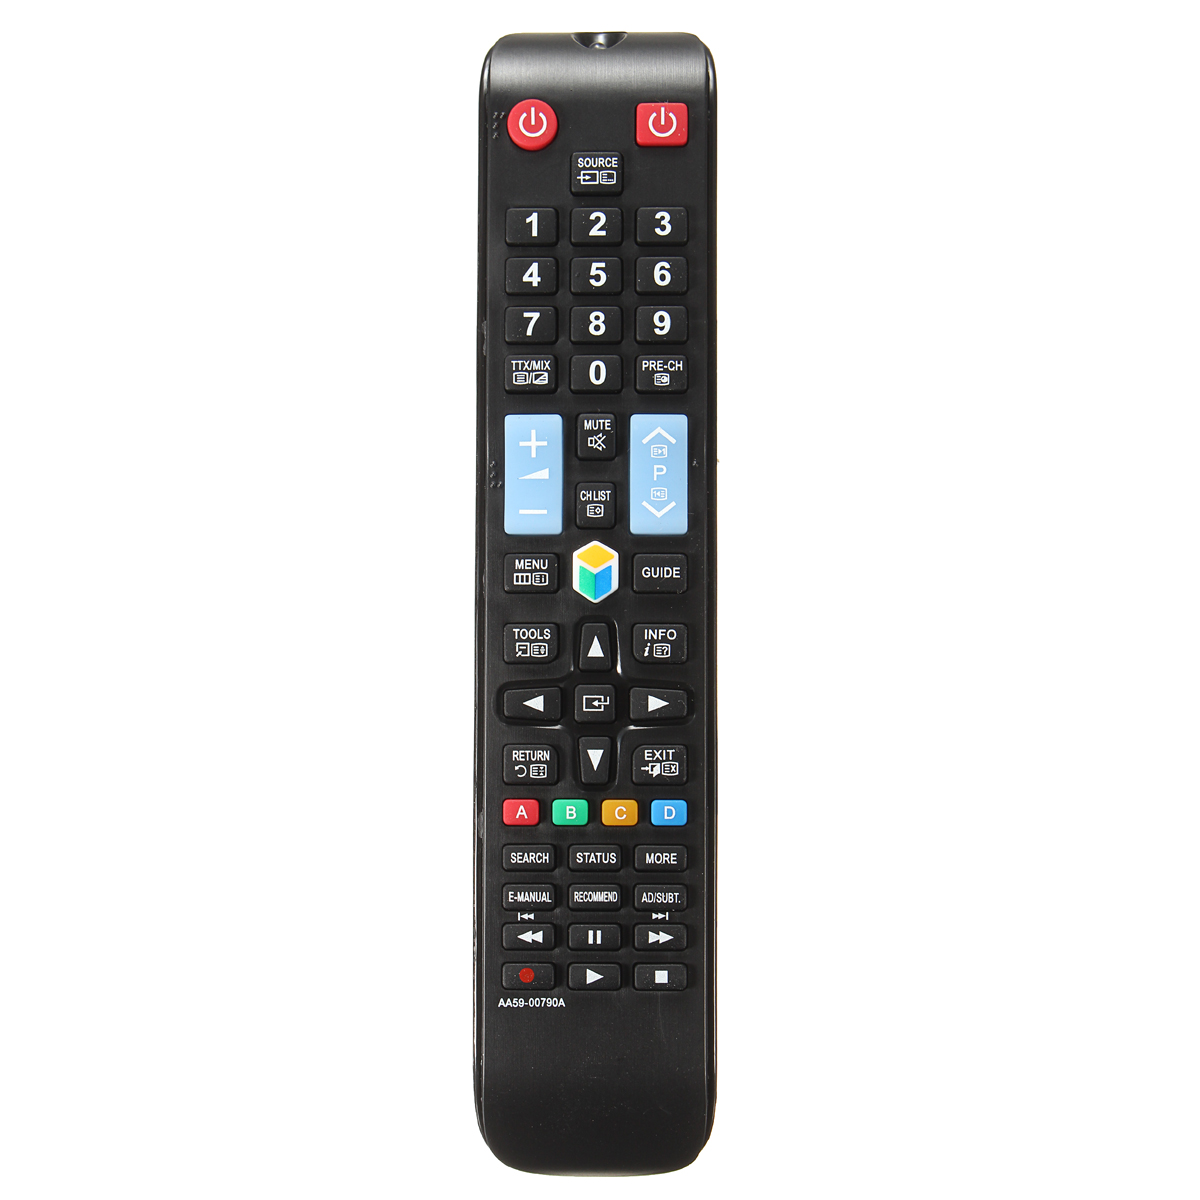 AA59-00797A-Replacement-TV-Remote-Control-For-Samsung-Remote-Control-AA59-00793A-AA59-00790A-1403466